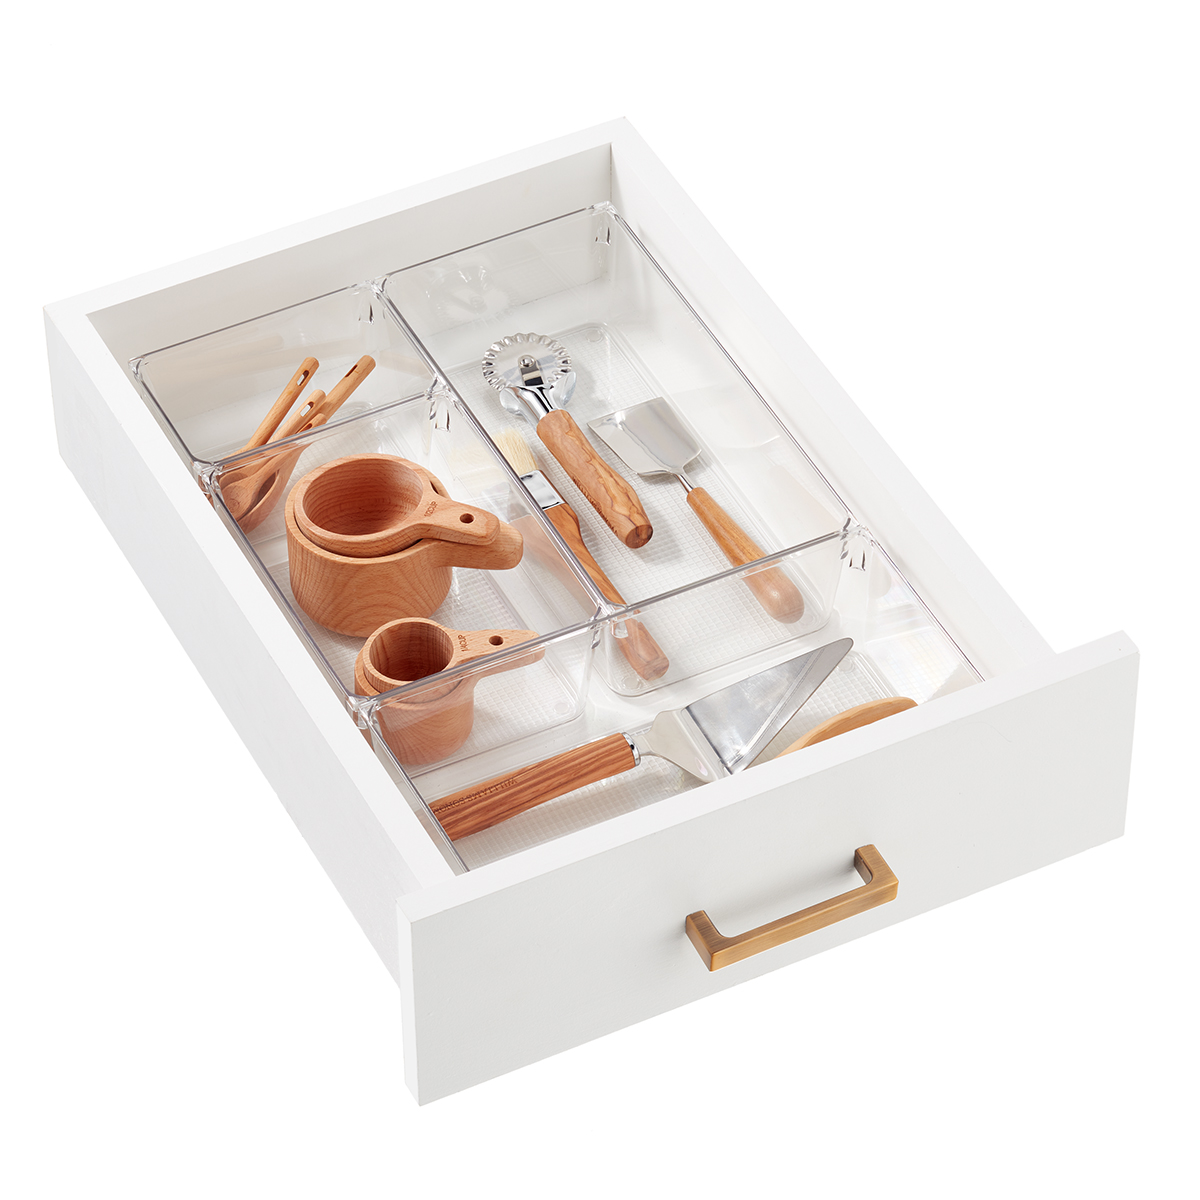 https://www.containerstore.com/catalogimages/463822/10090078g-deep-drawer-organizers-cle.jpg